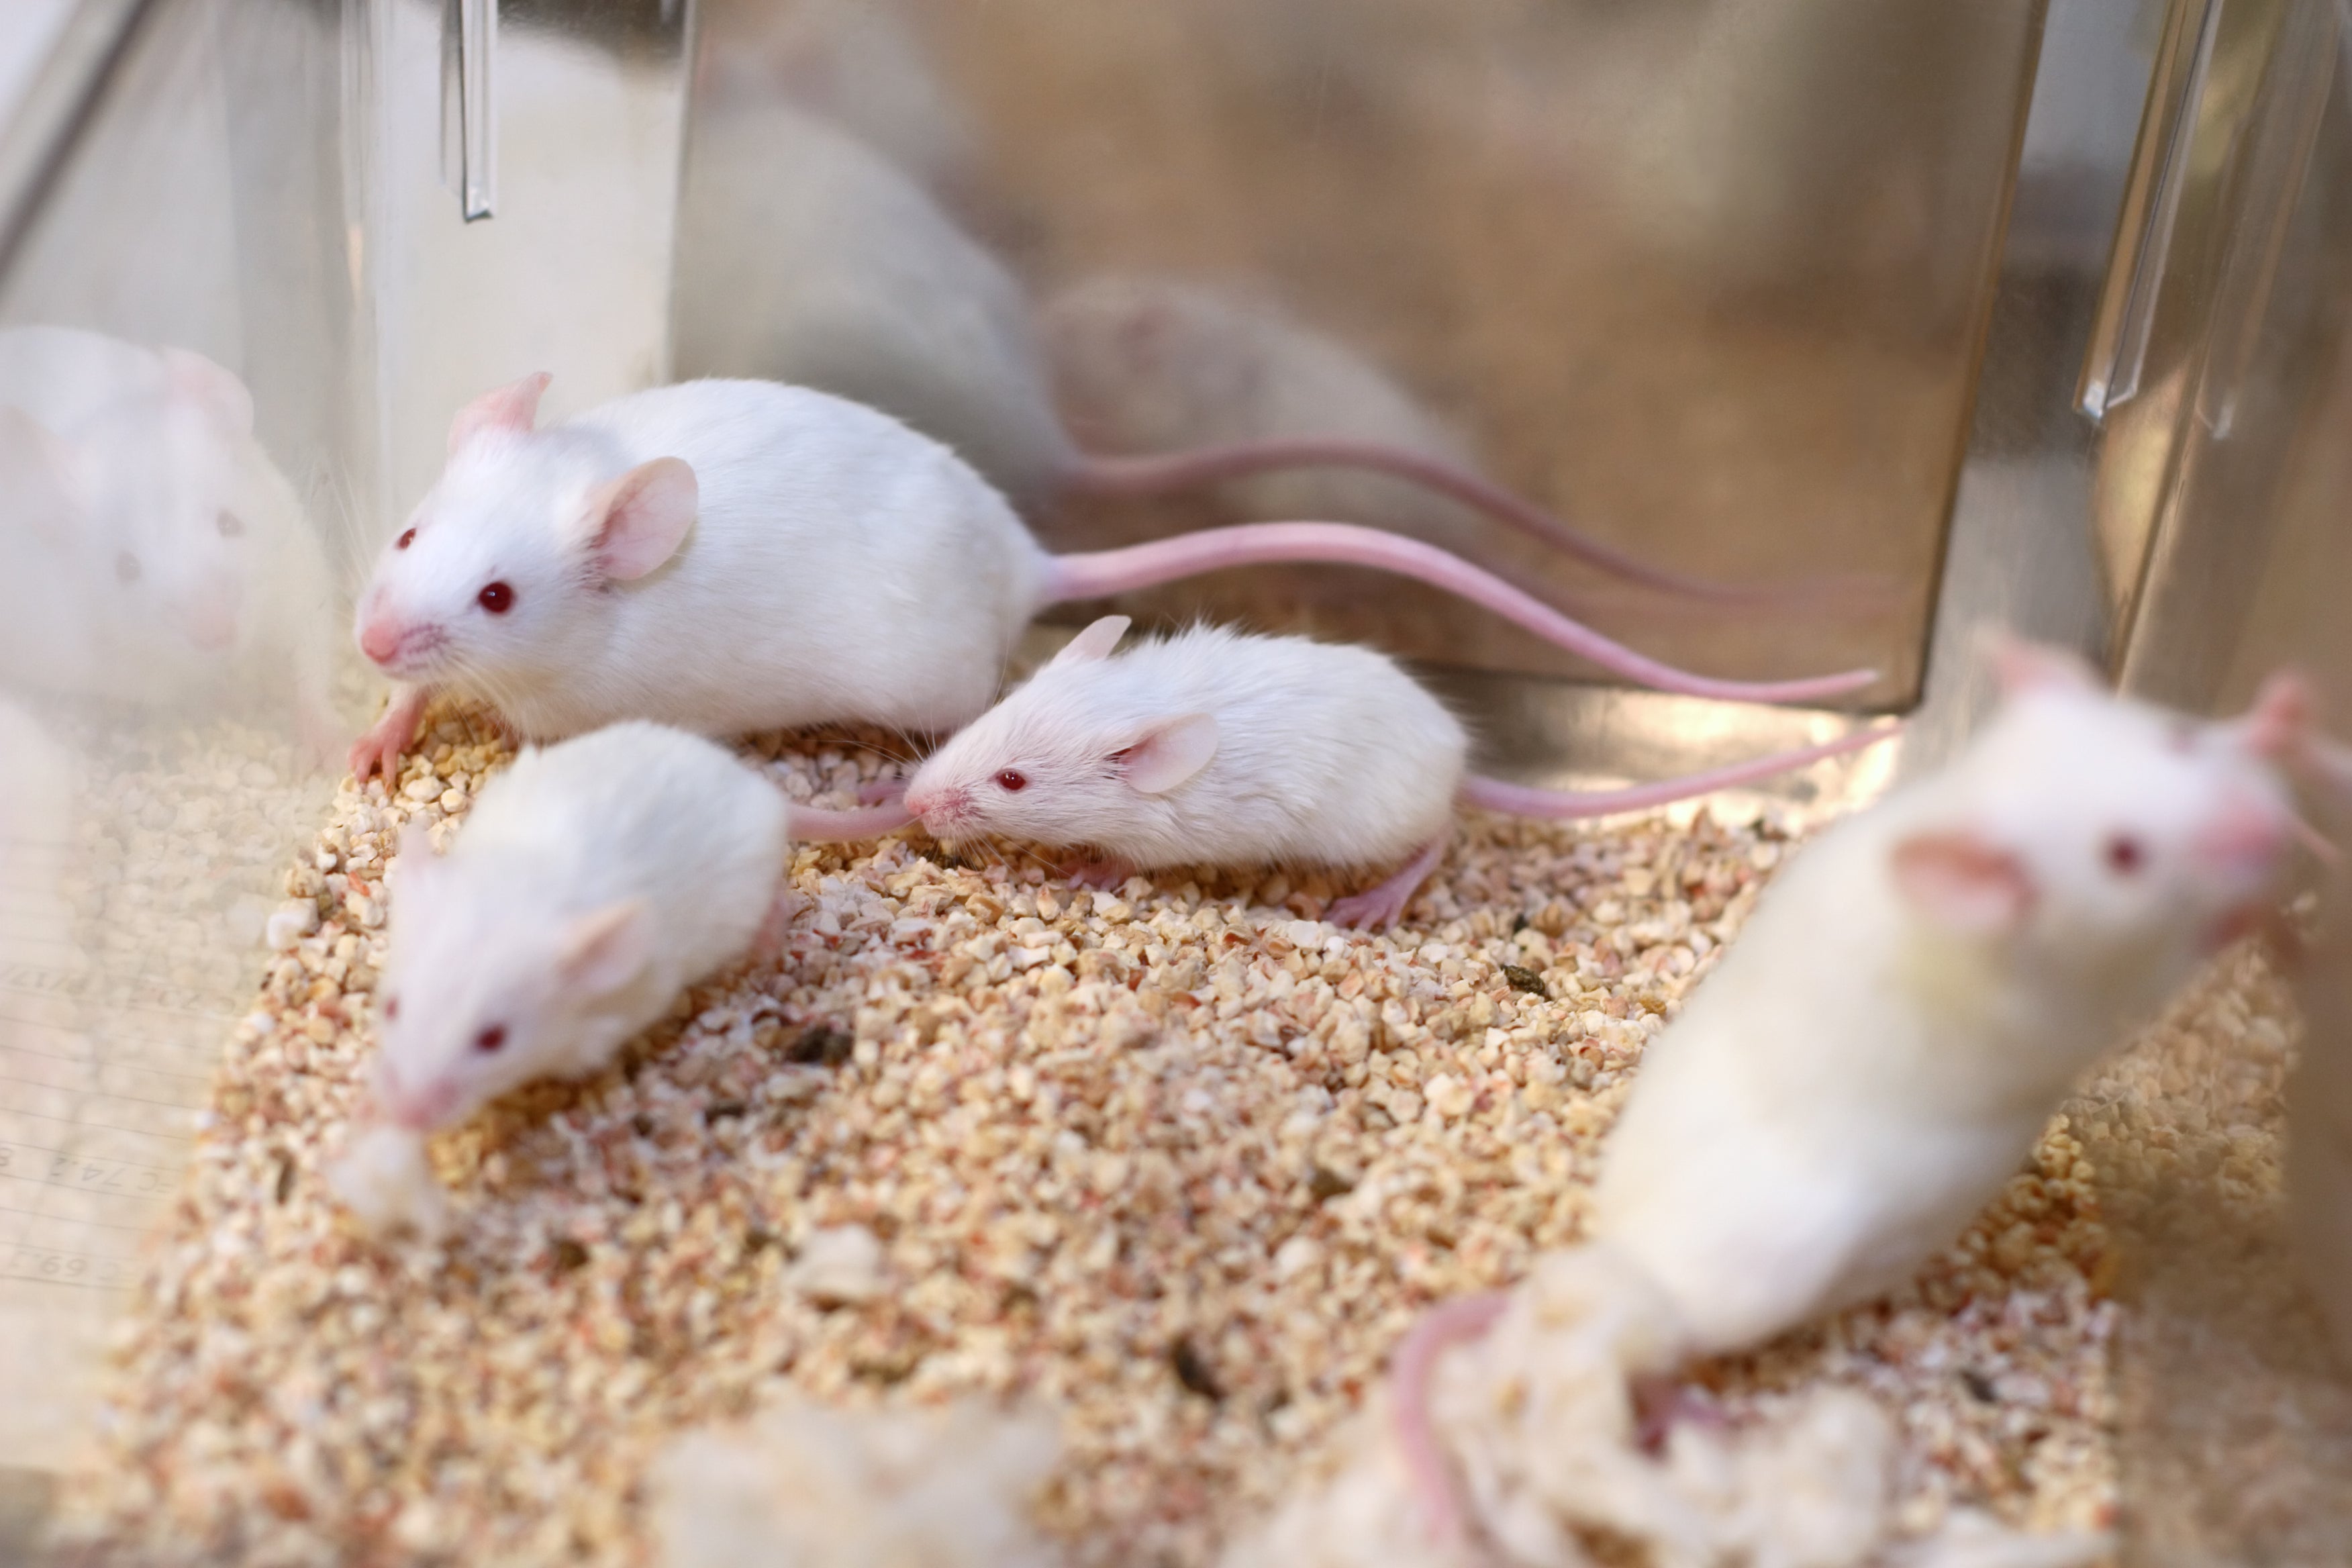 Scientists Are Concerned over . Environmental Agency's Plan to Limit Animal  Research - Scientific American